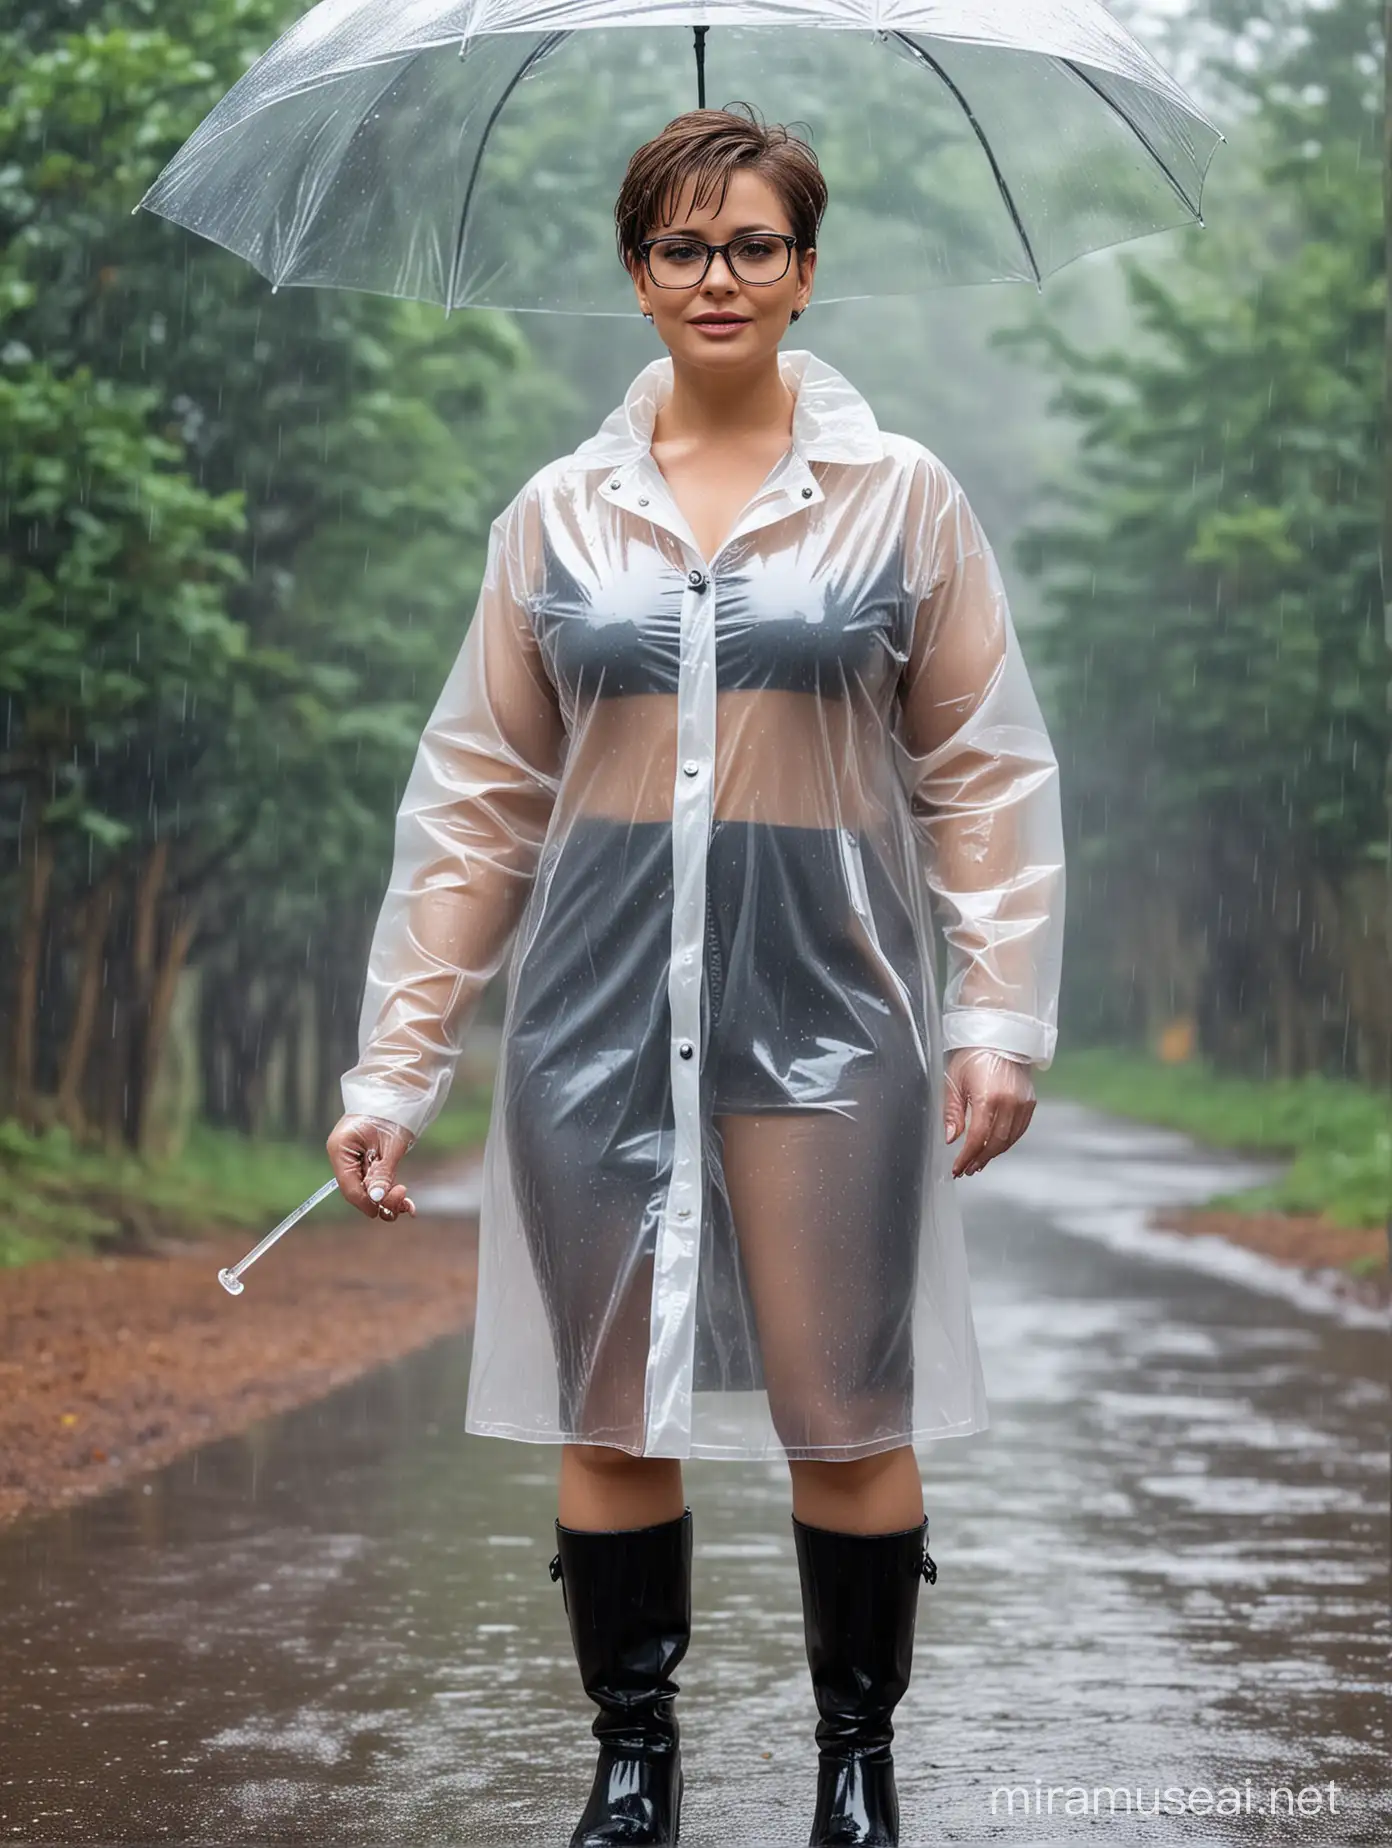 Confident PlusSize Woman in Latex Raincoat Stands Assertively in Rain